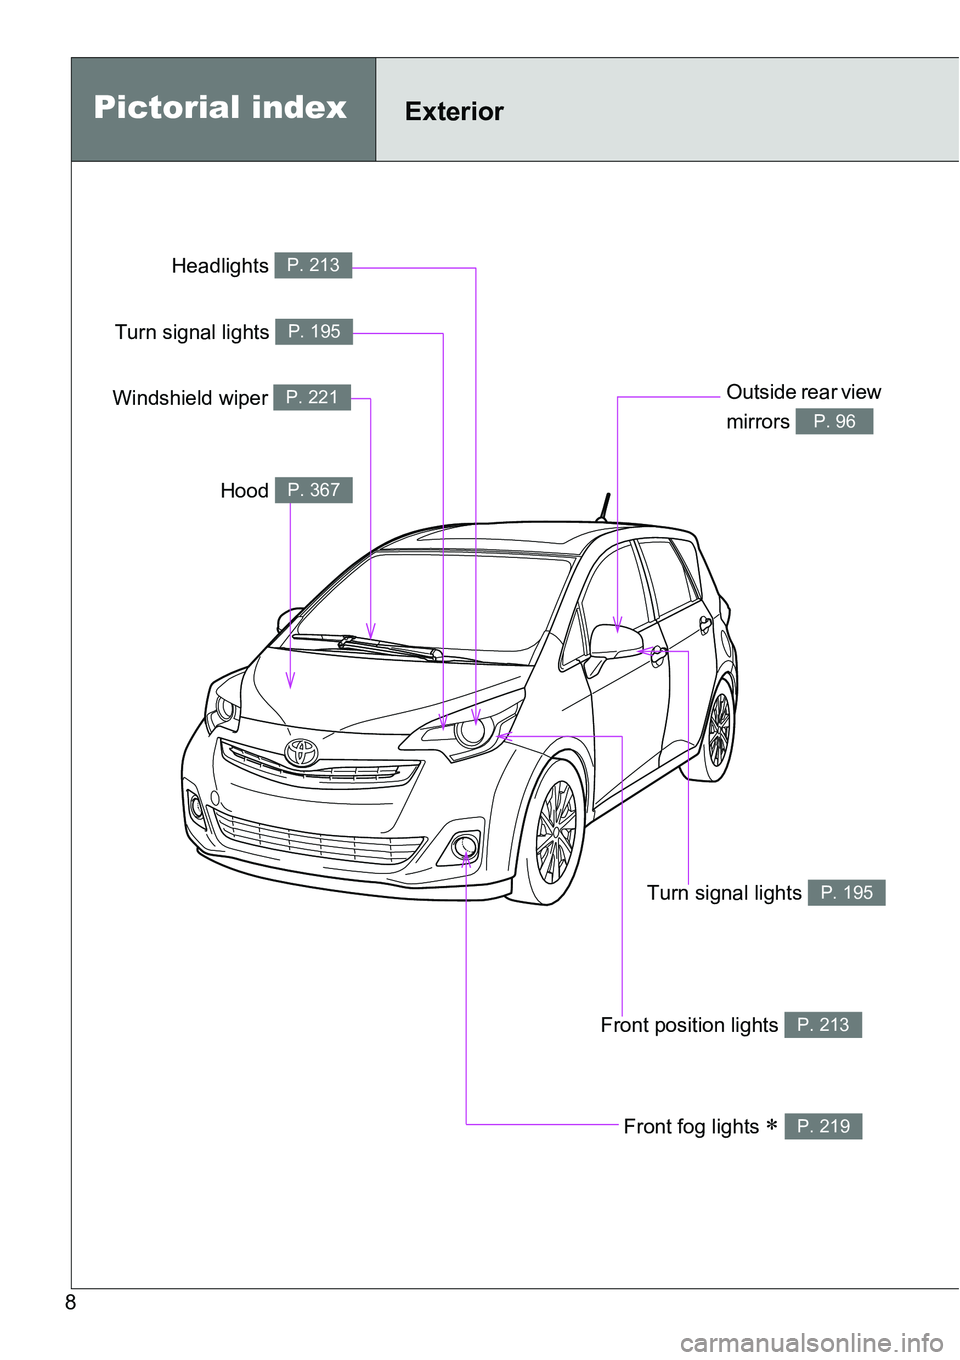 TOYOTA VERSO S 2015  Owners Manual 8
Front position lights P. 213
Pictorial indexExterior
Front fog lights  P. 219
Turn signal lights P. 195
Outside rear view 
mirrors 
P. 96
Headlights P. 213
Turn signal lights P. 195
Windshield wi